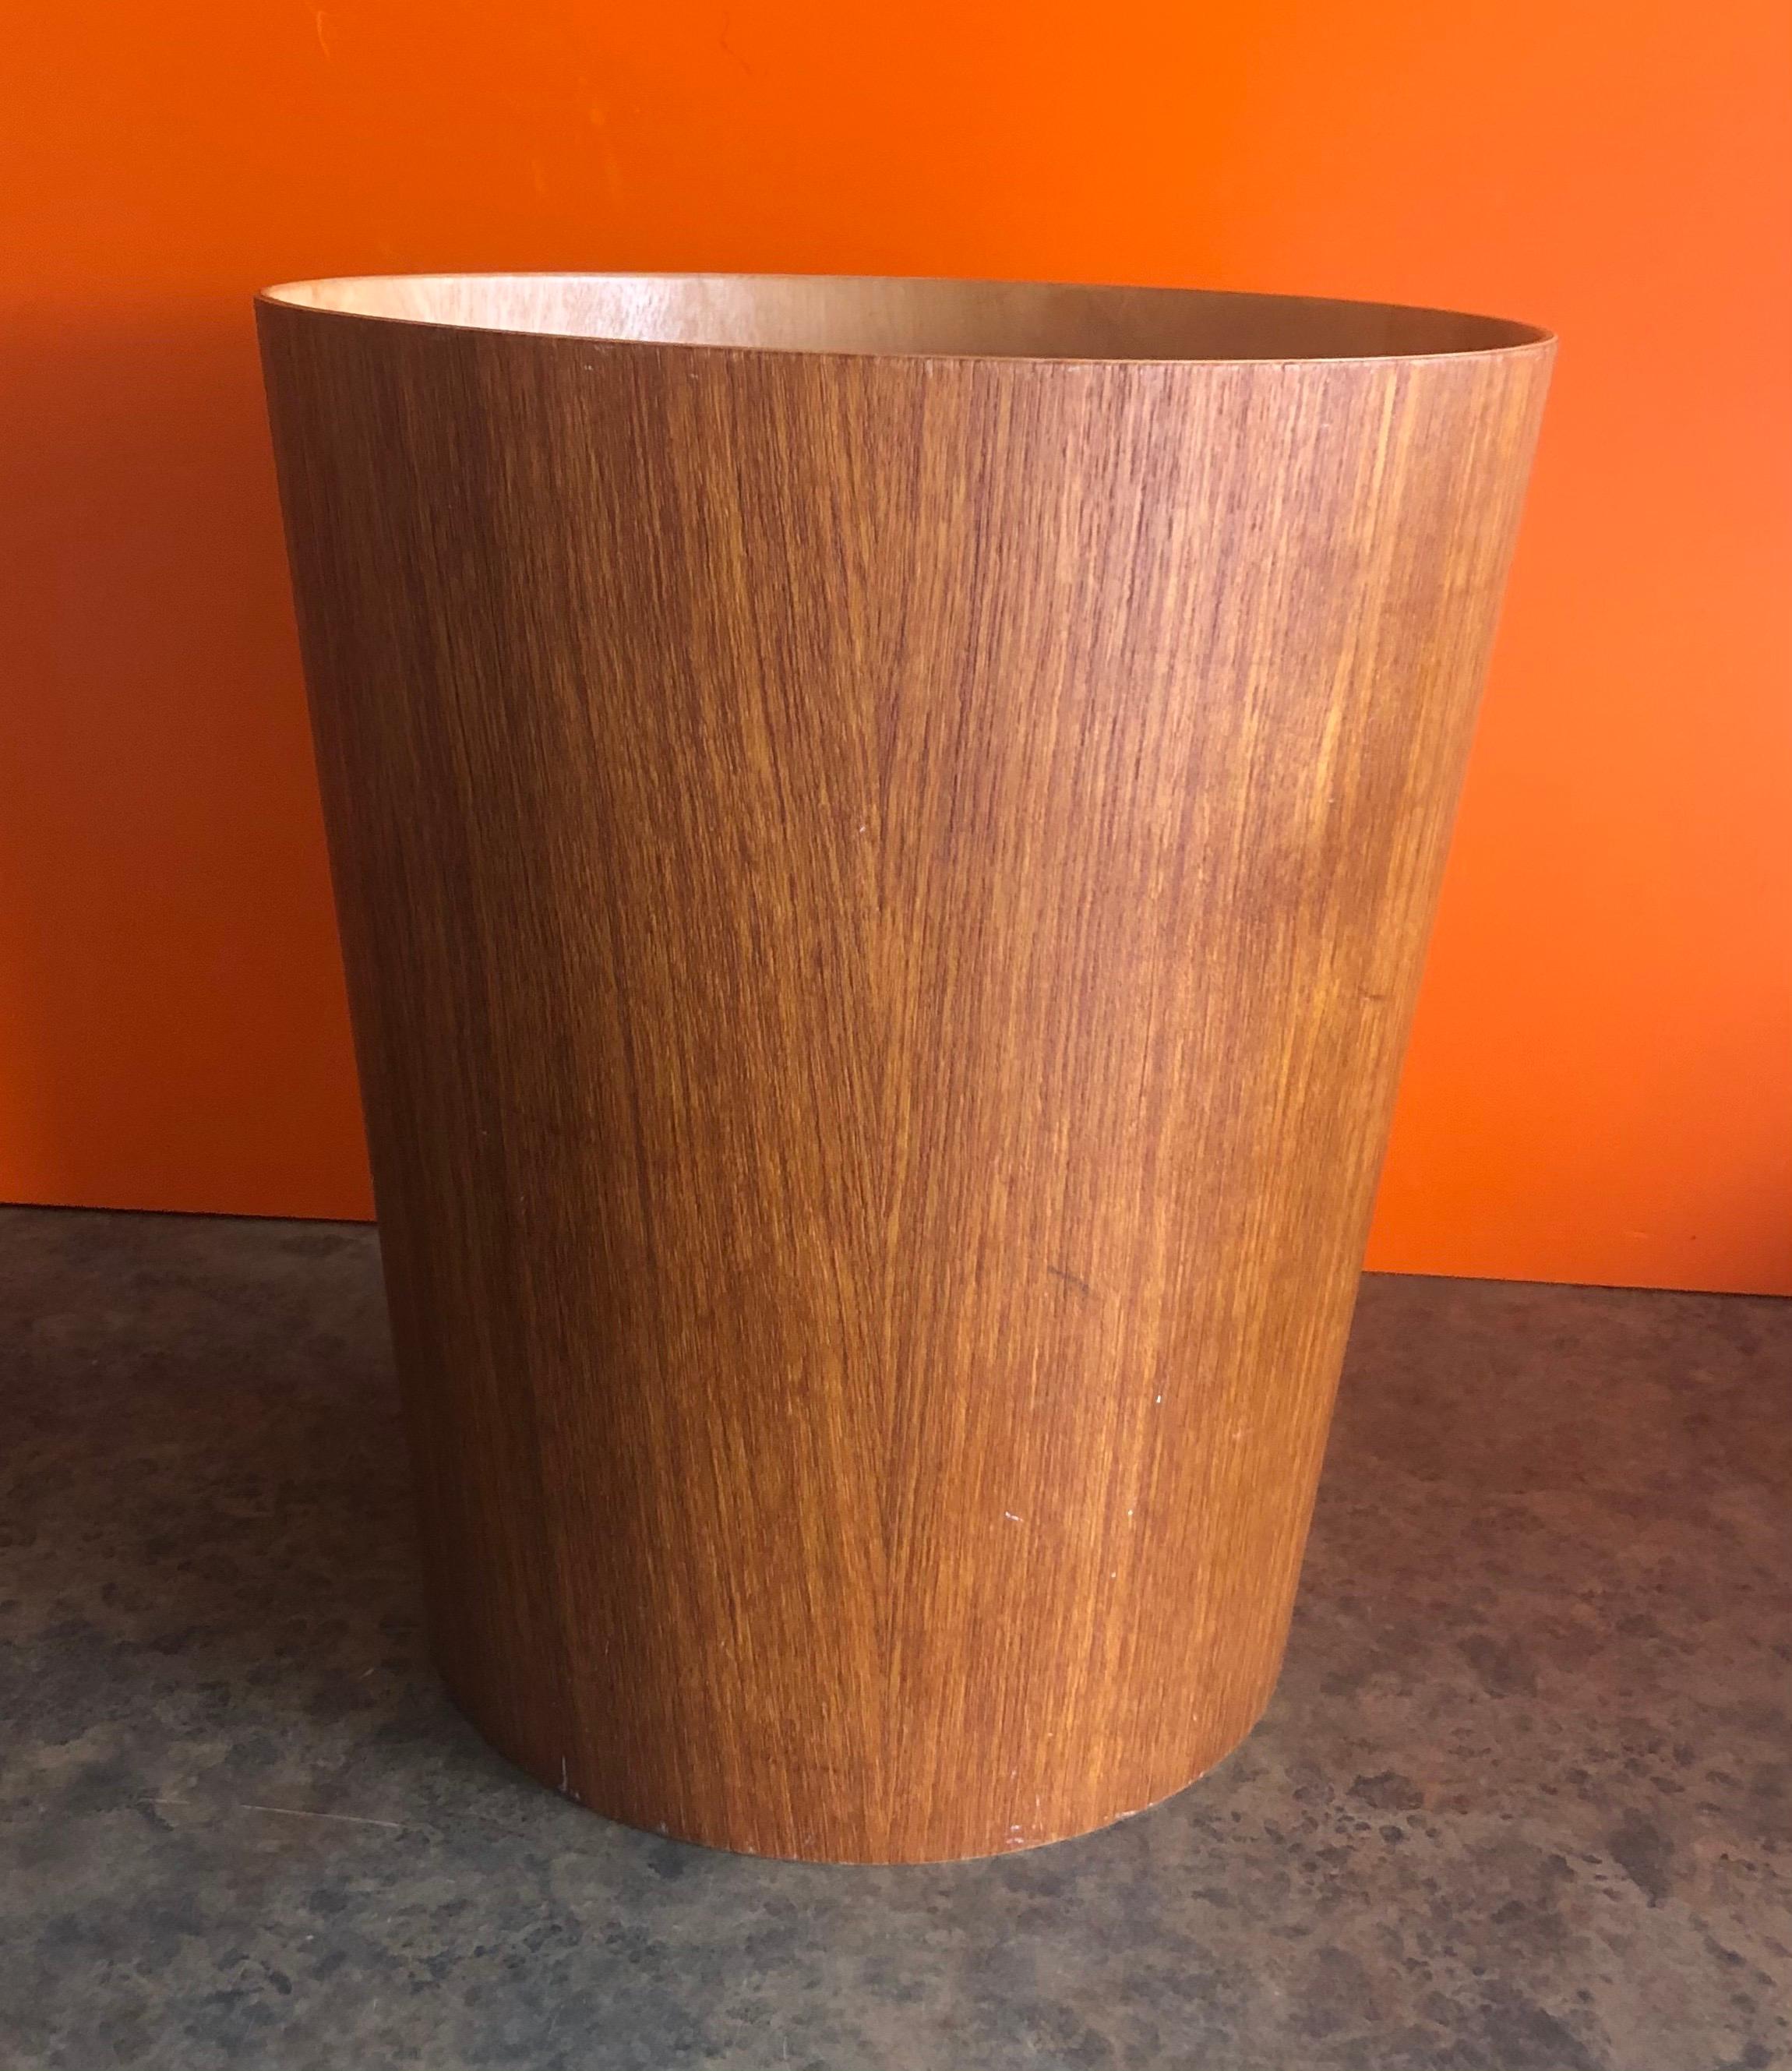 A beautiful Mid-Century Modern Scandinavian teak waste paper basket by Martin Aberg for Servex House of rainbow wood products, circa 1960s. The piece is made in Sweden and in very good vintage condition. The waste basket is 11